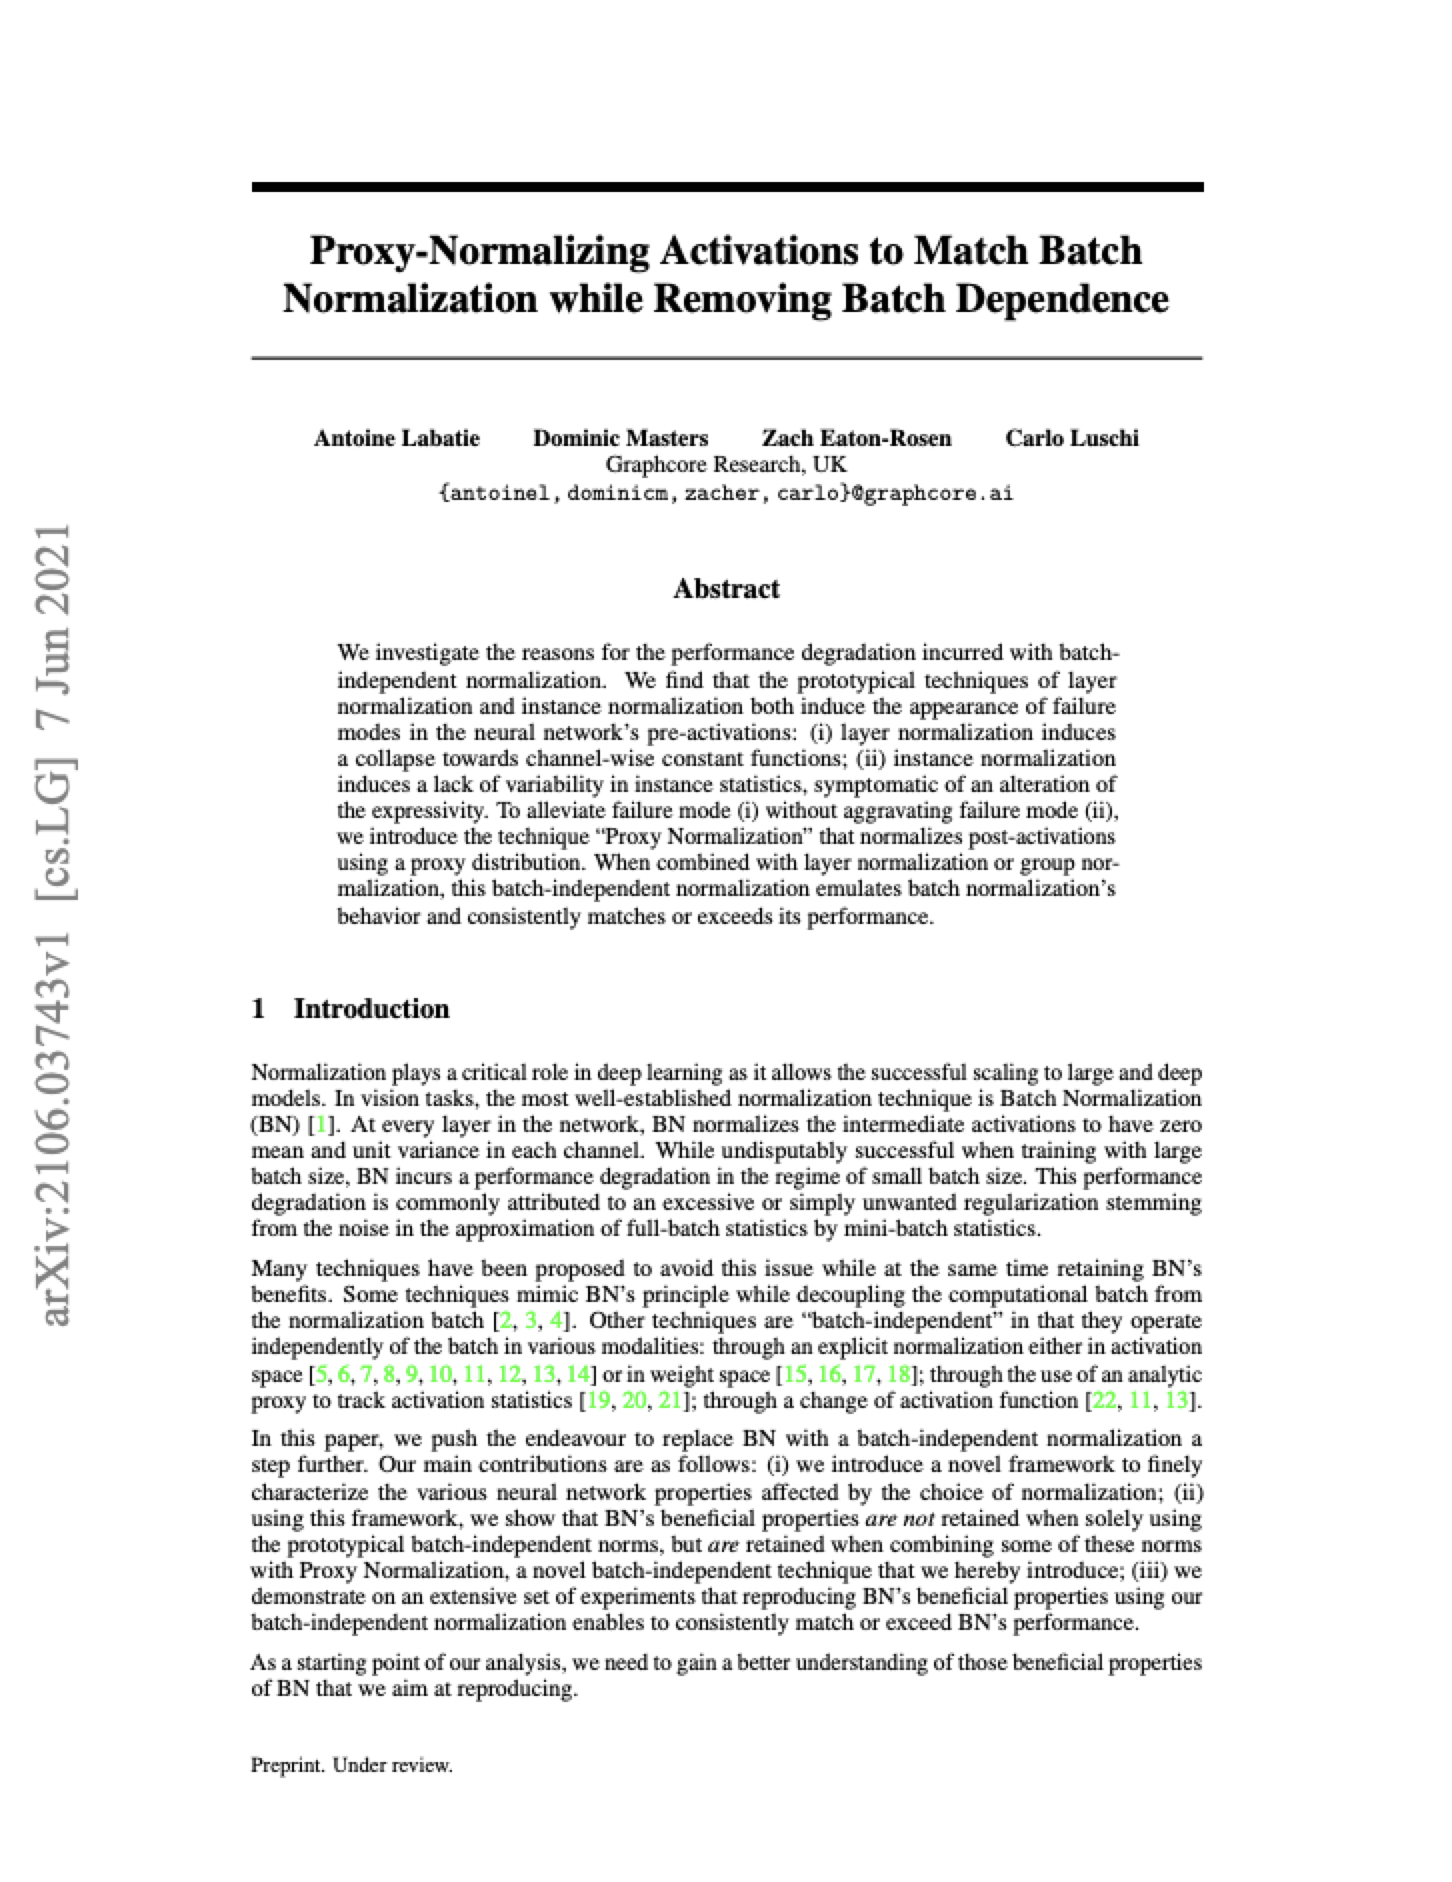 Graphcore Research: Proxy-Normalizing Activations to Match Batch Normalization while Removing Batch Dependence